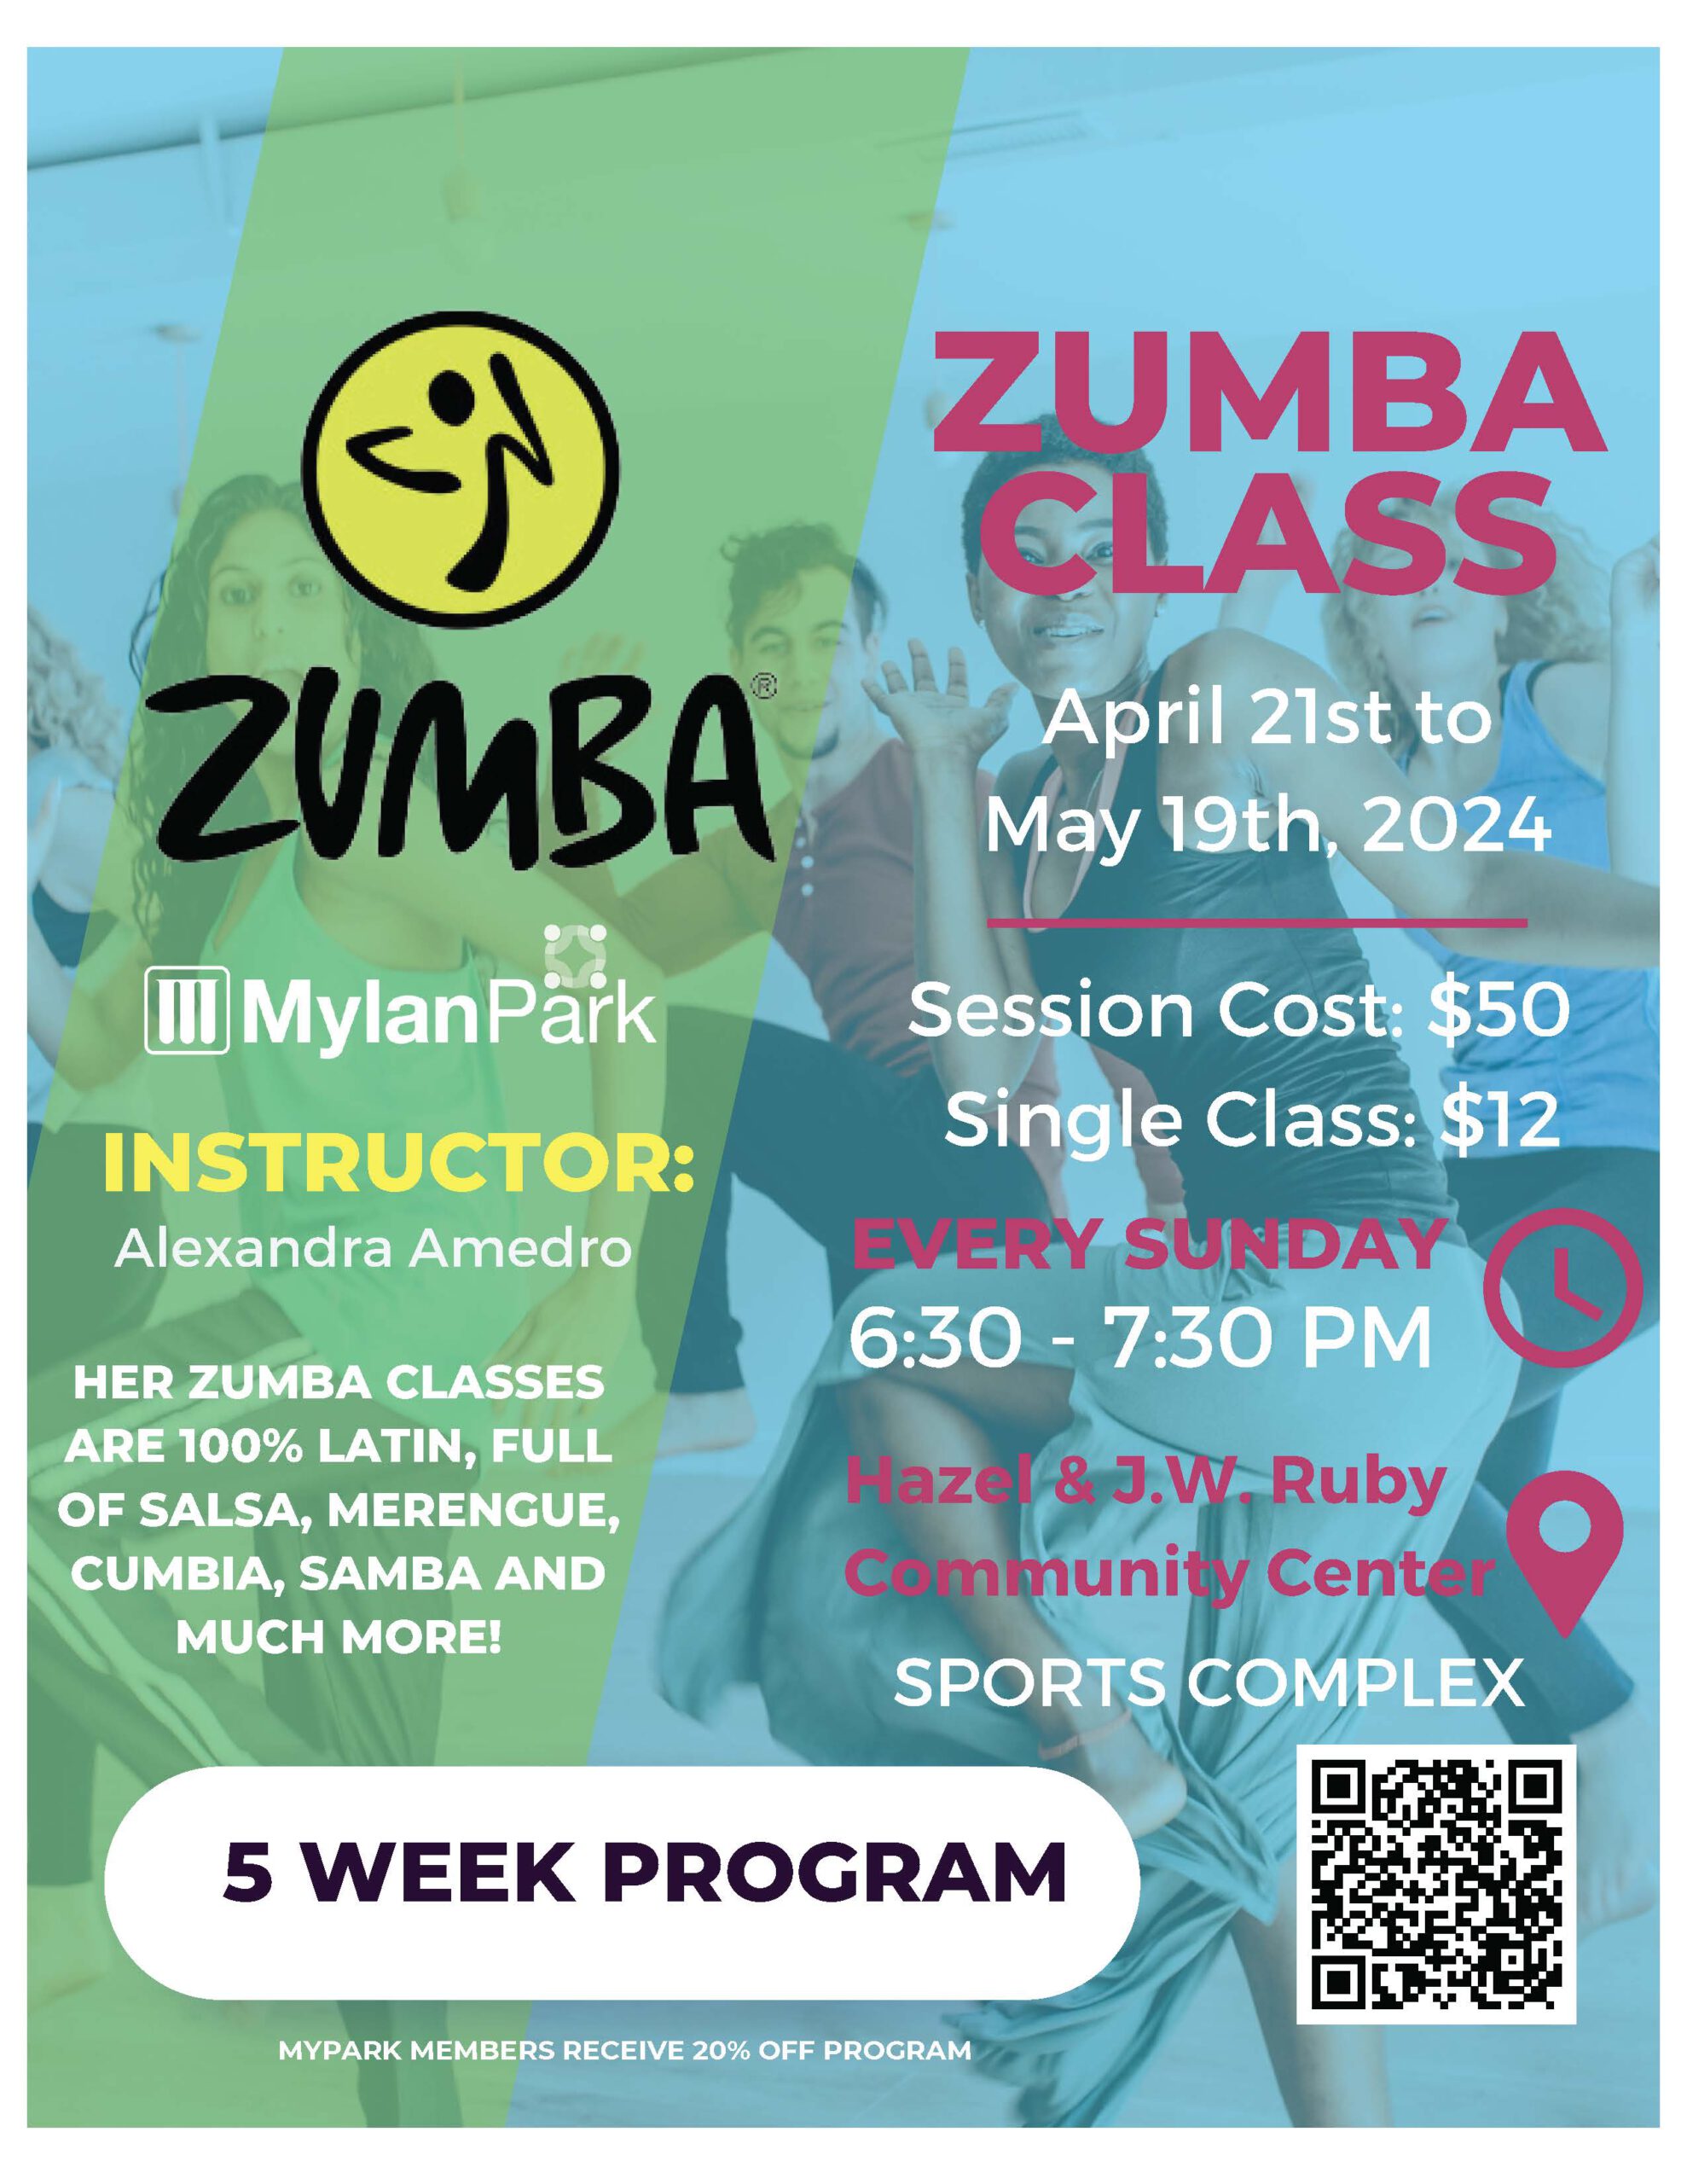 Zumba Classes at Mylan Park with Alex Amedro Sundays, April 21 - May 19, 2024 6:30 pm to 7:30 pm.